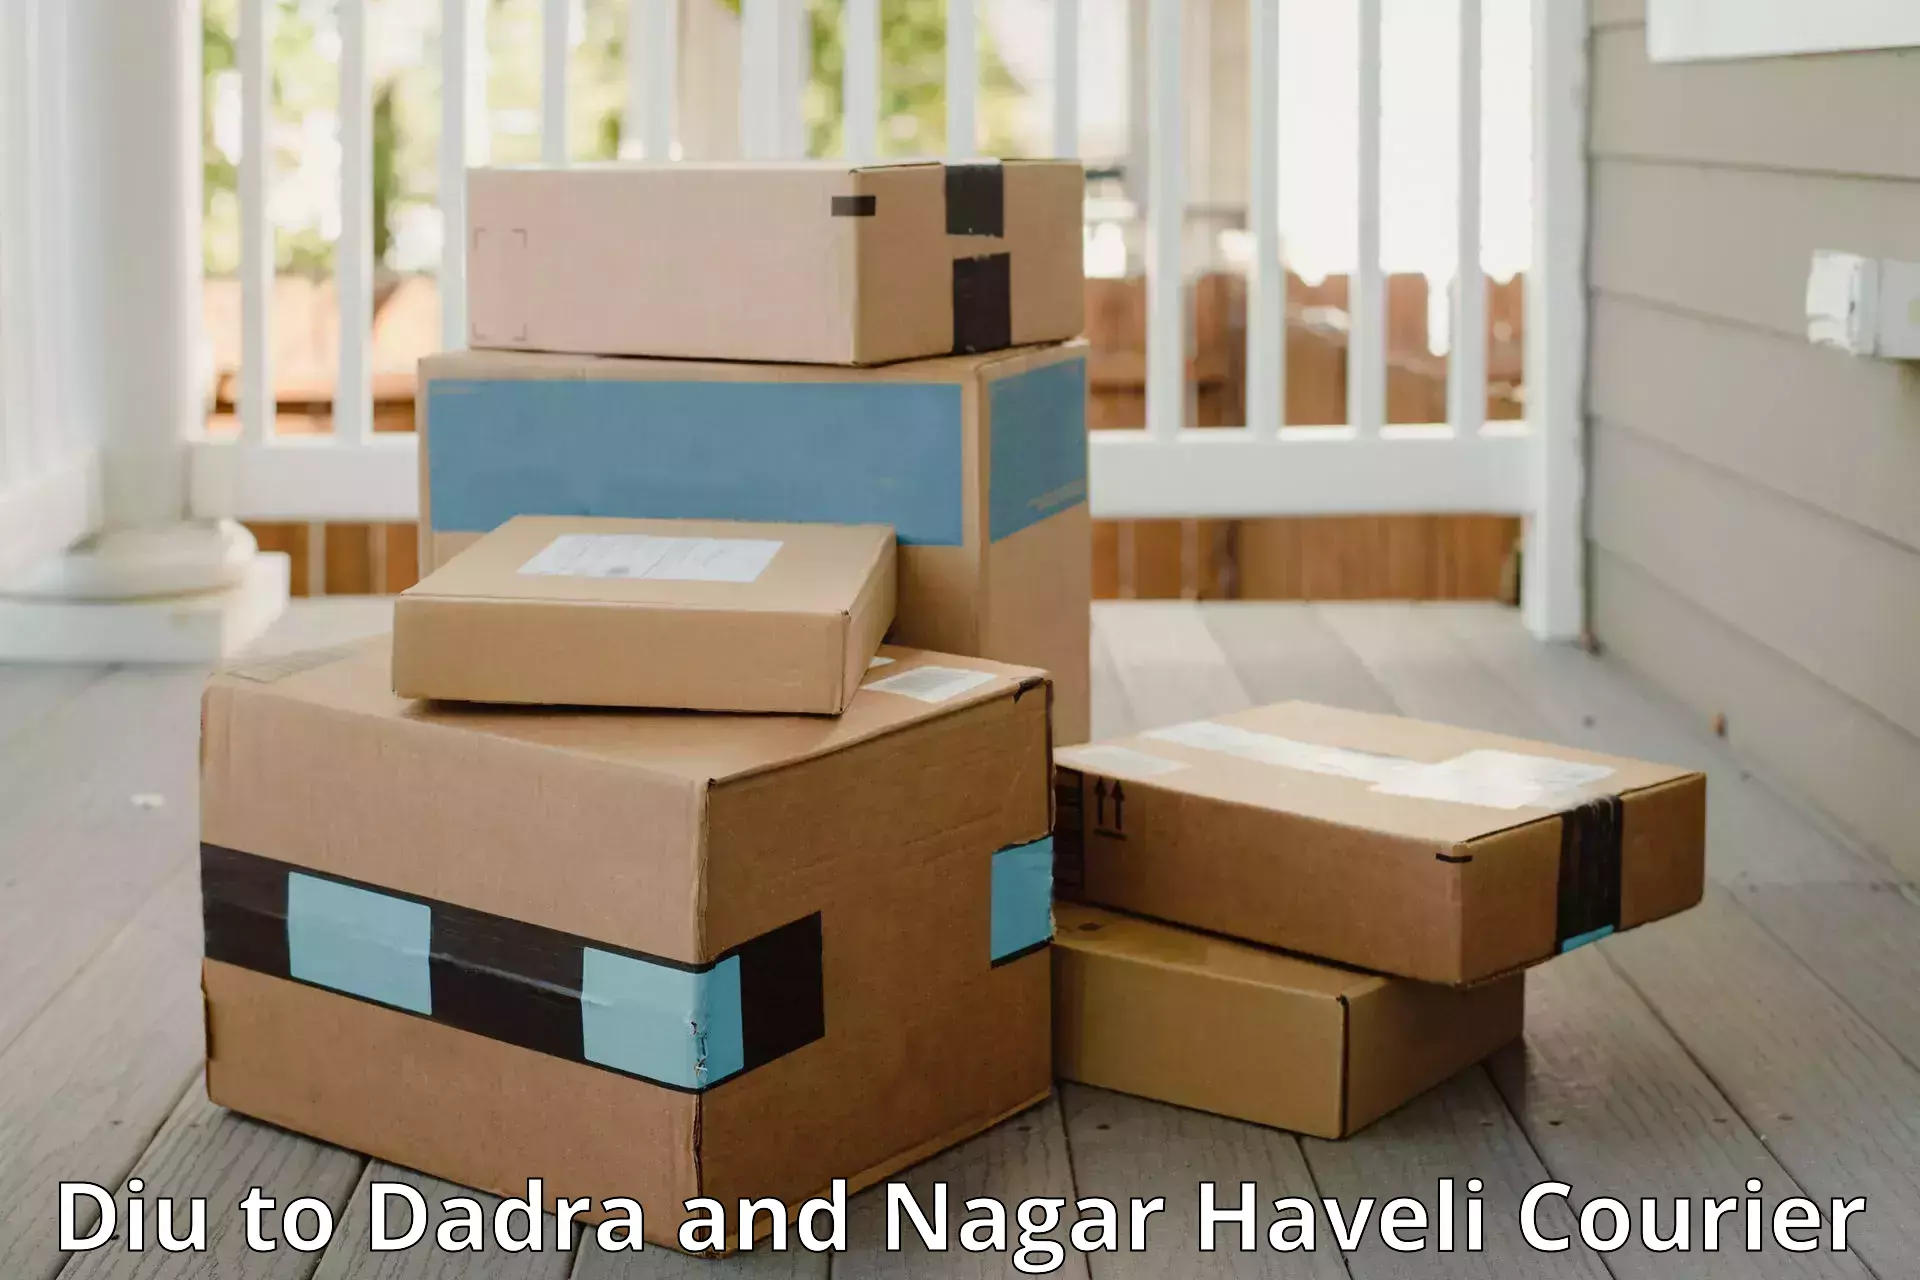 Luggage storage and delivery Diu to Dadra and Nagar Haveli